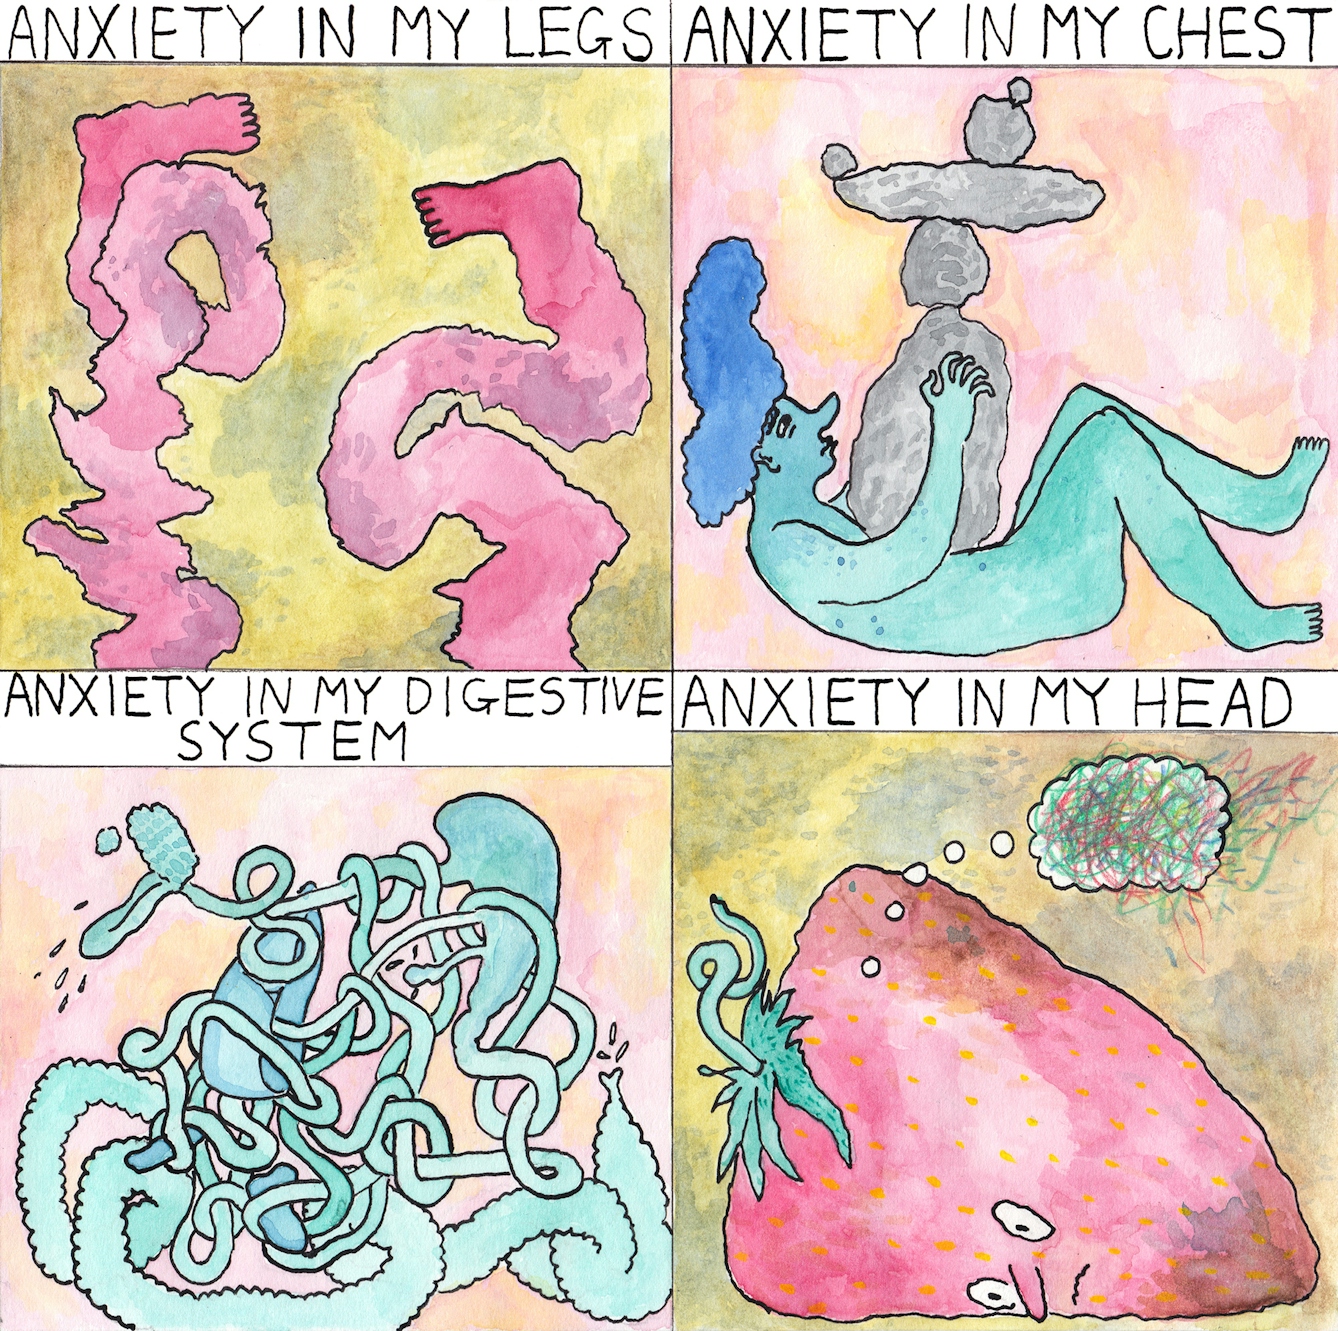 Four graphic images representing different kinds of anxiexy: anxiety in my legs, anxiety in my chest, anxiety in my digestive system, anxiety in my head